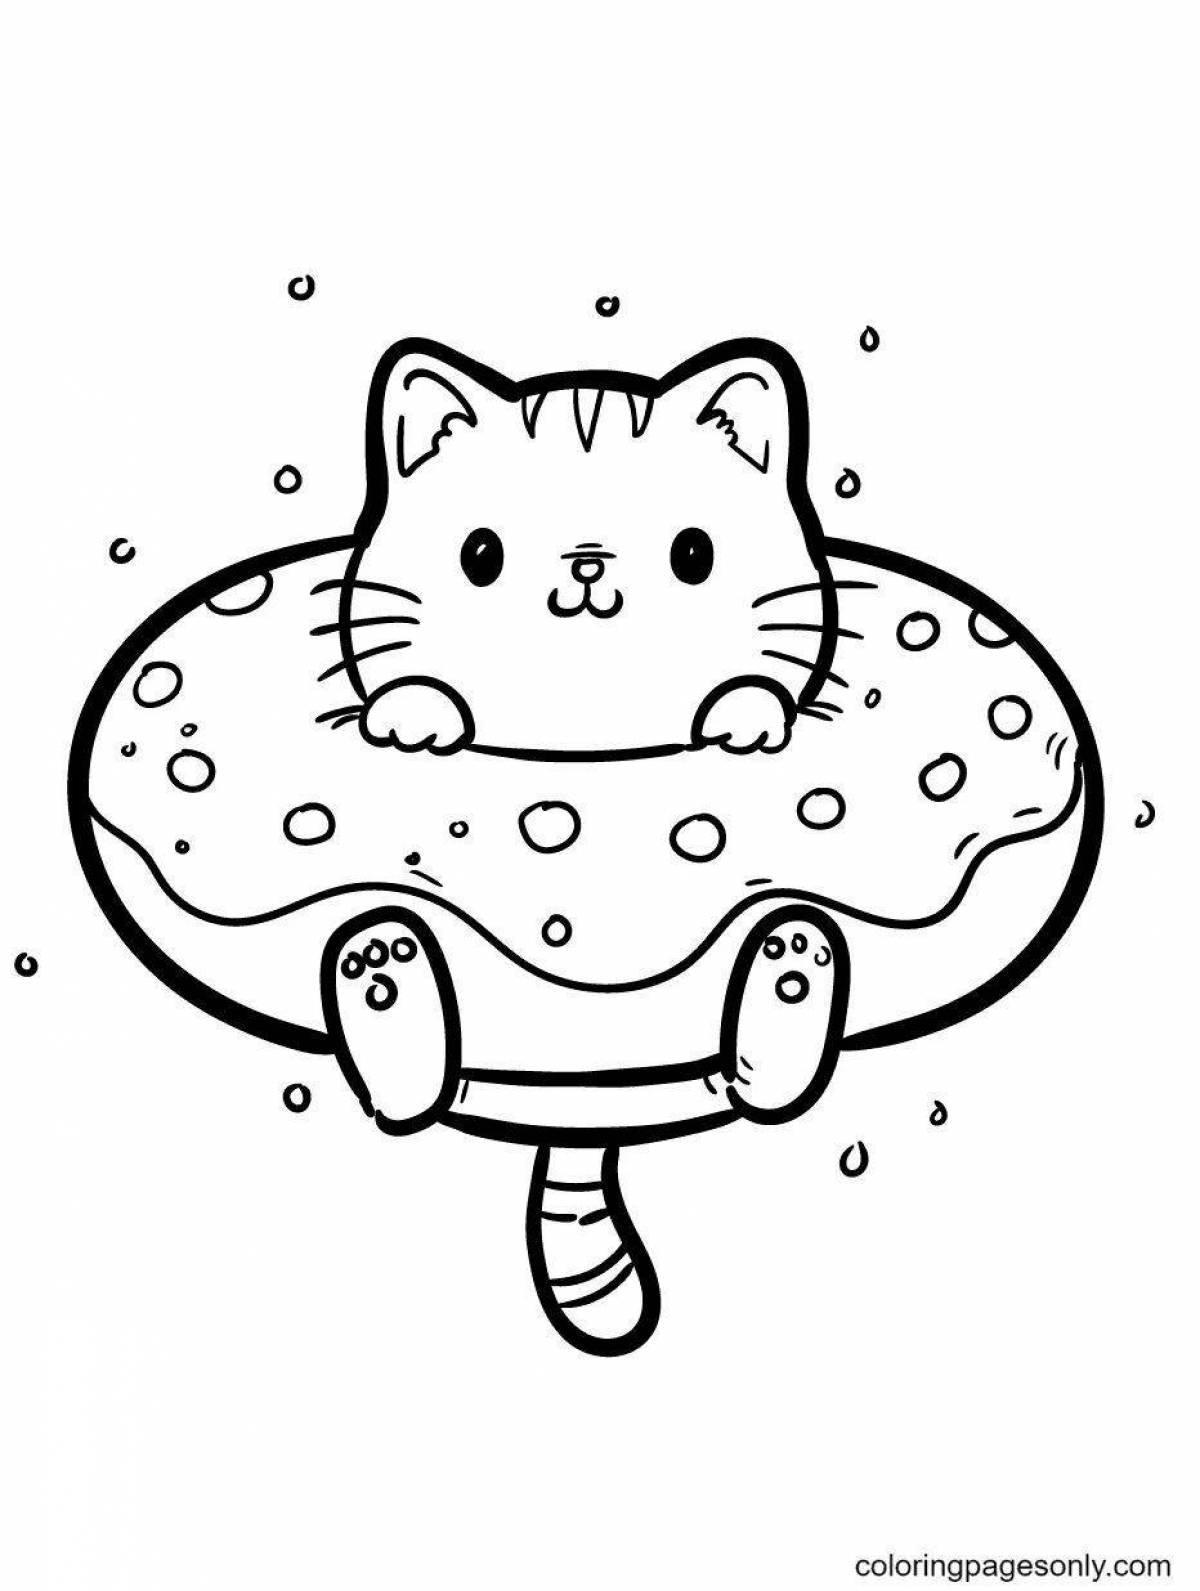 Outrageous donut cat coloring page